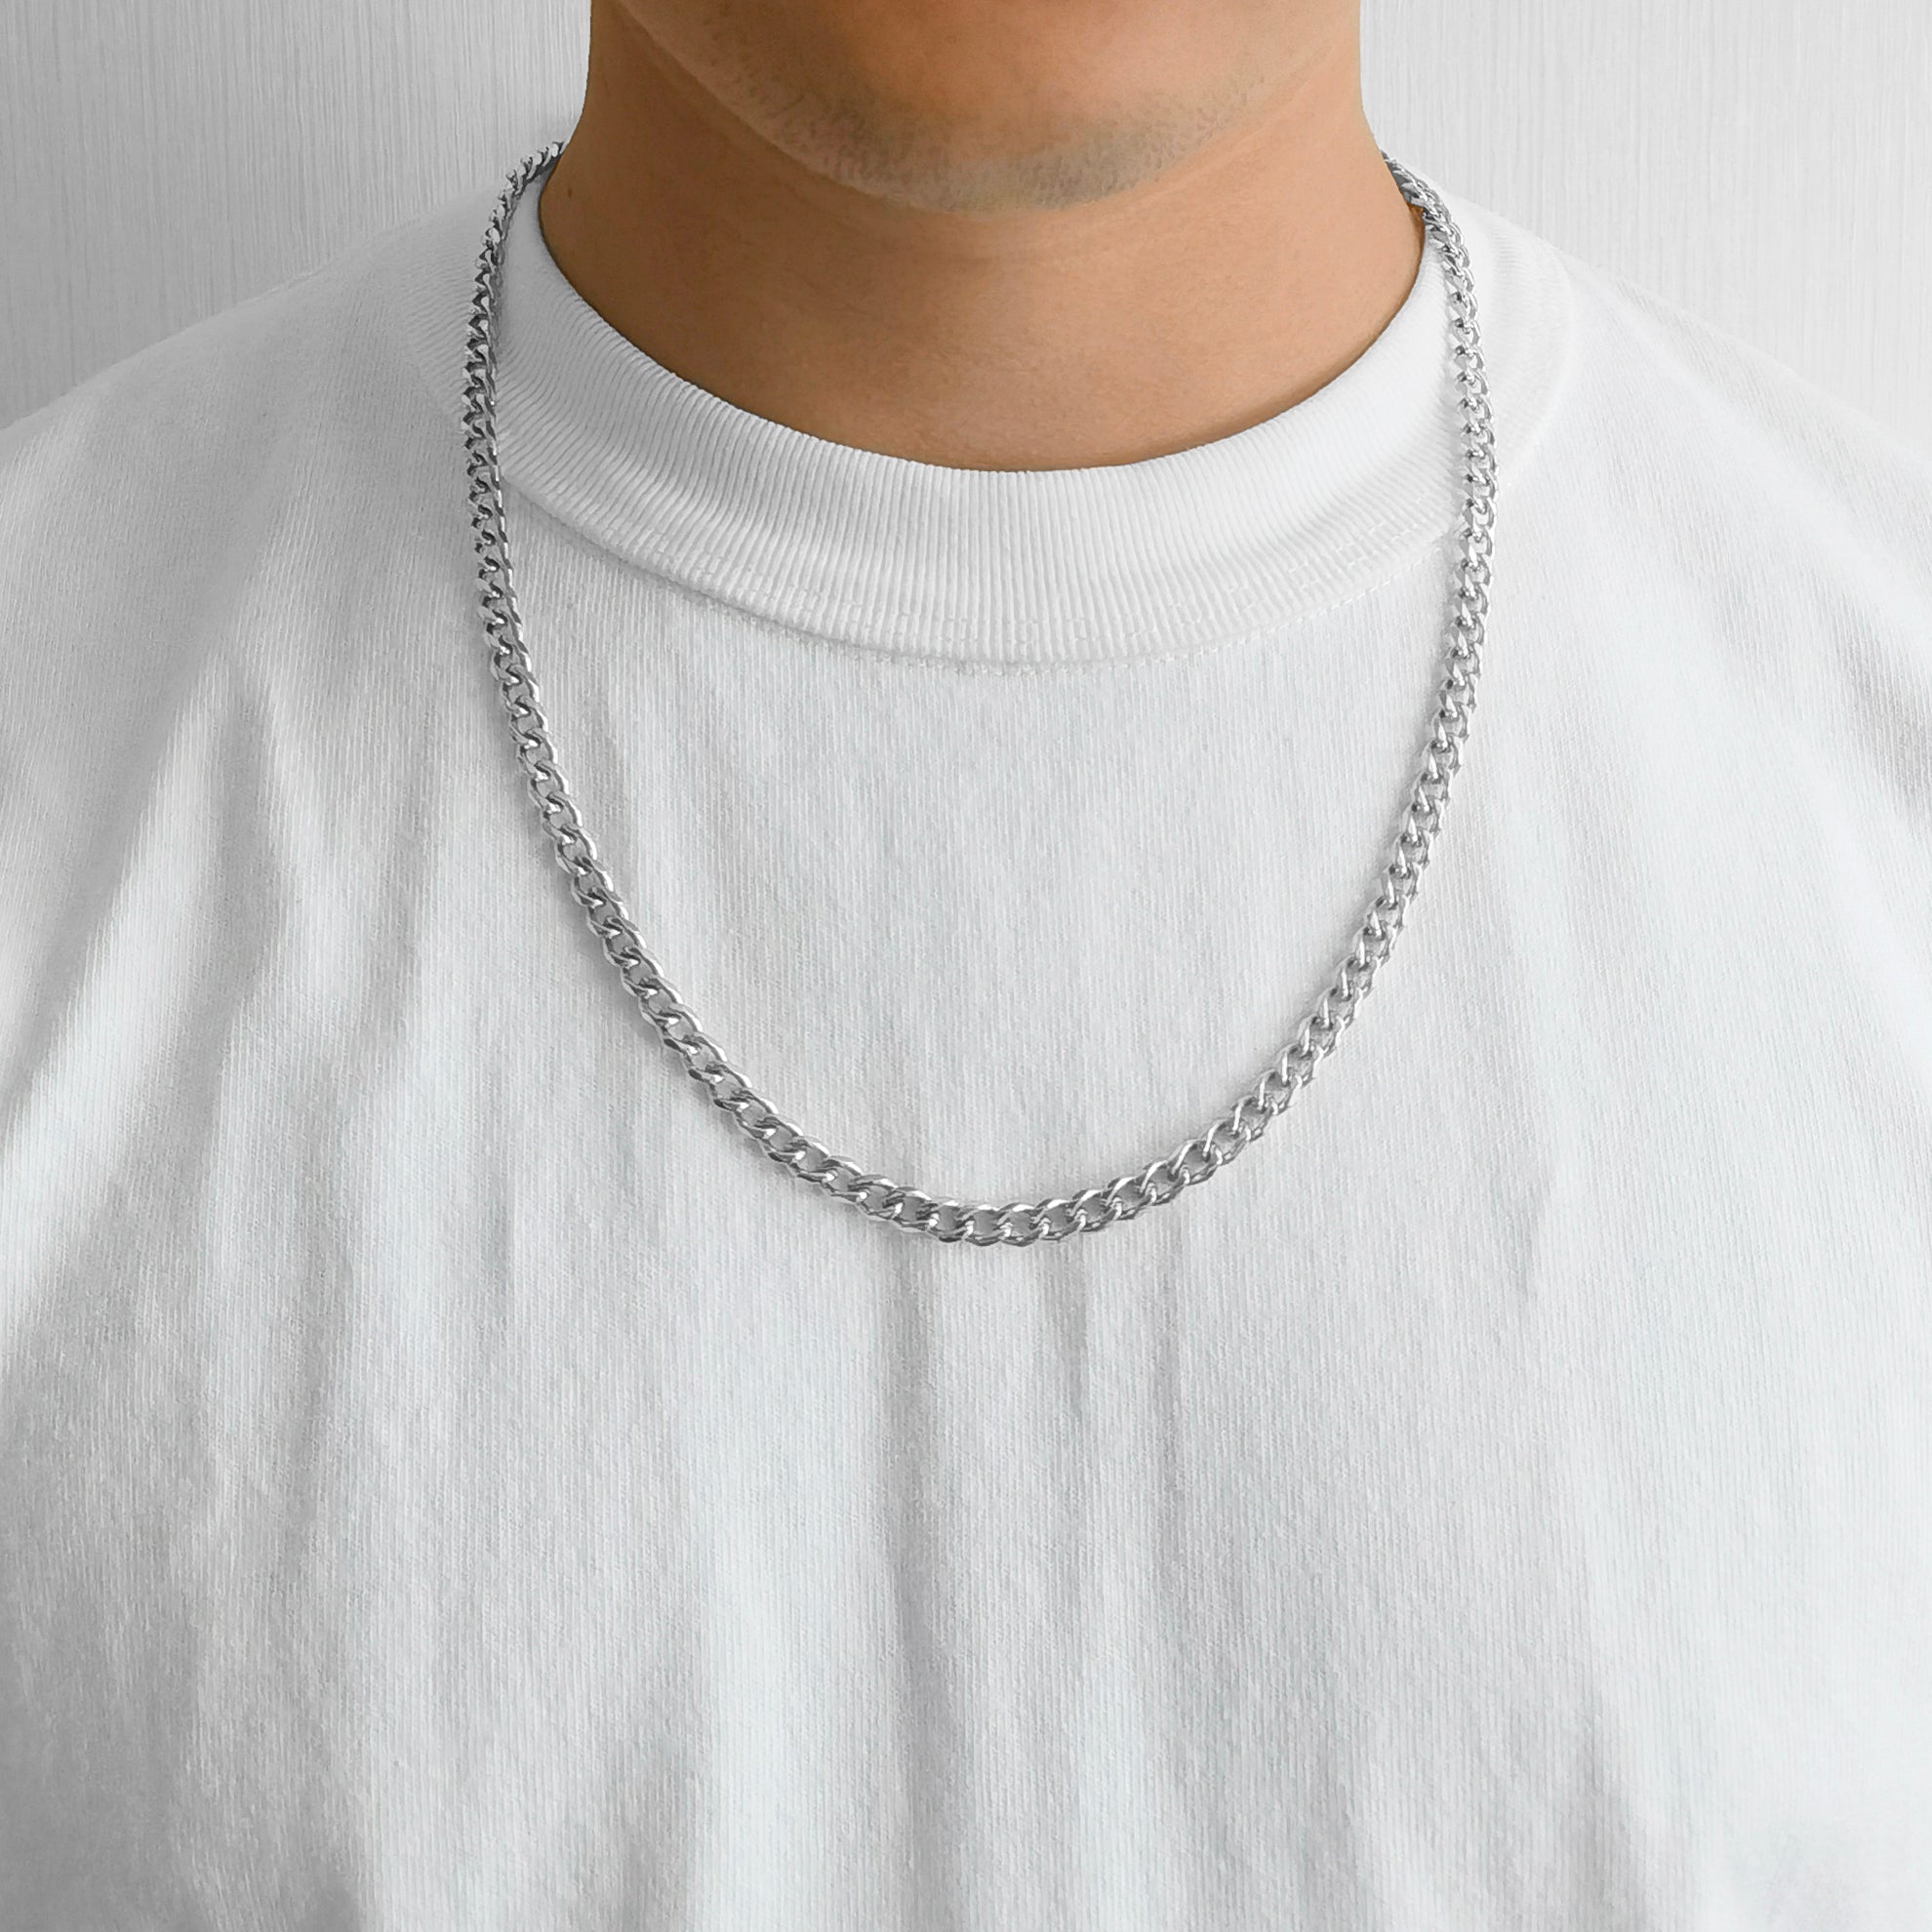 Men's 6mm Stainless Steel 18-24 Inch Curb Chain Necklace